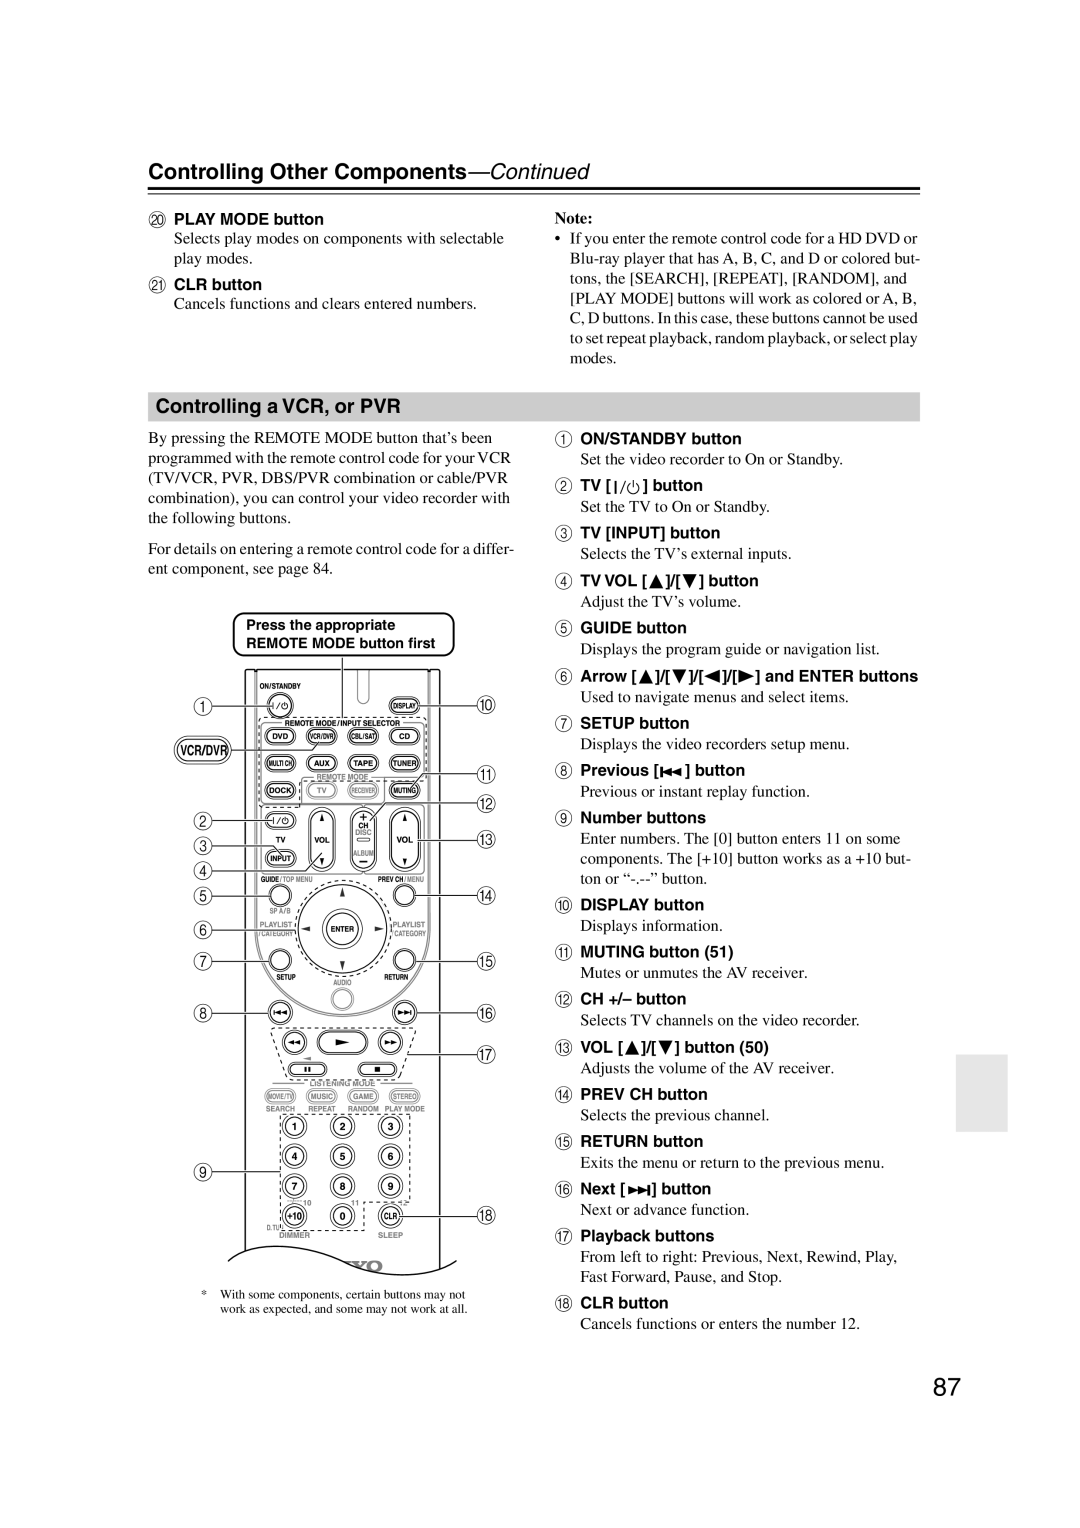 Onkyo HT-S6100 instruction manual Controlling a VCR, or PVR, Controlling Other Components-Continued, Vcr/Dvr 